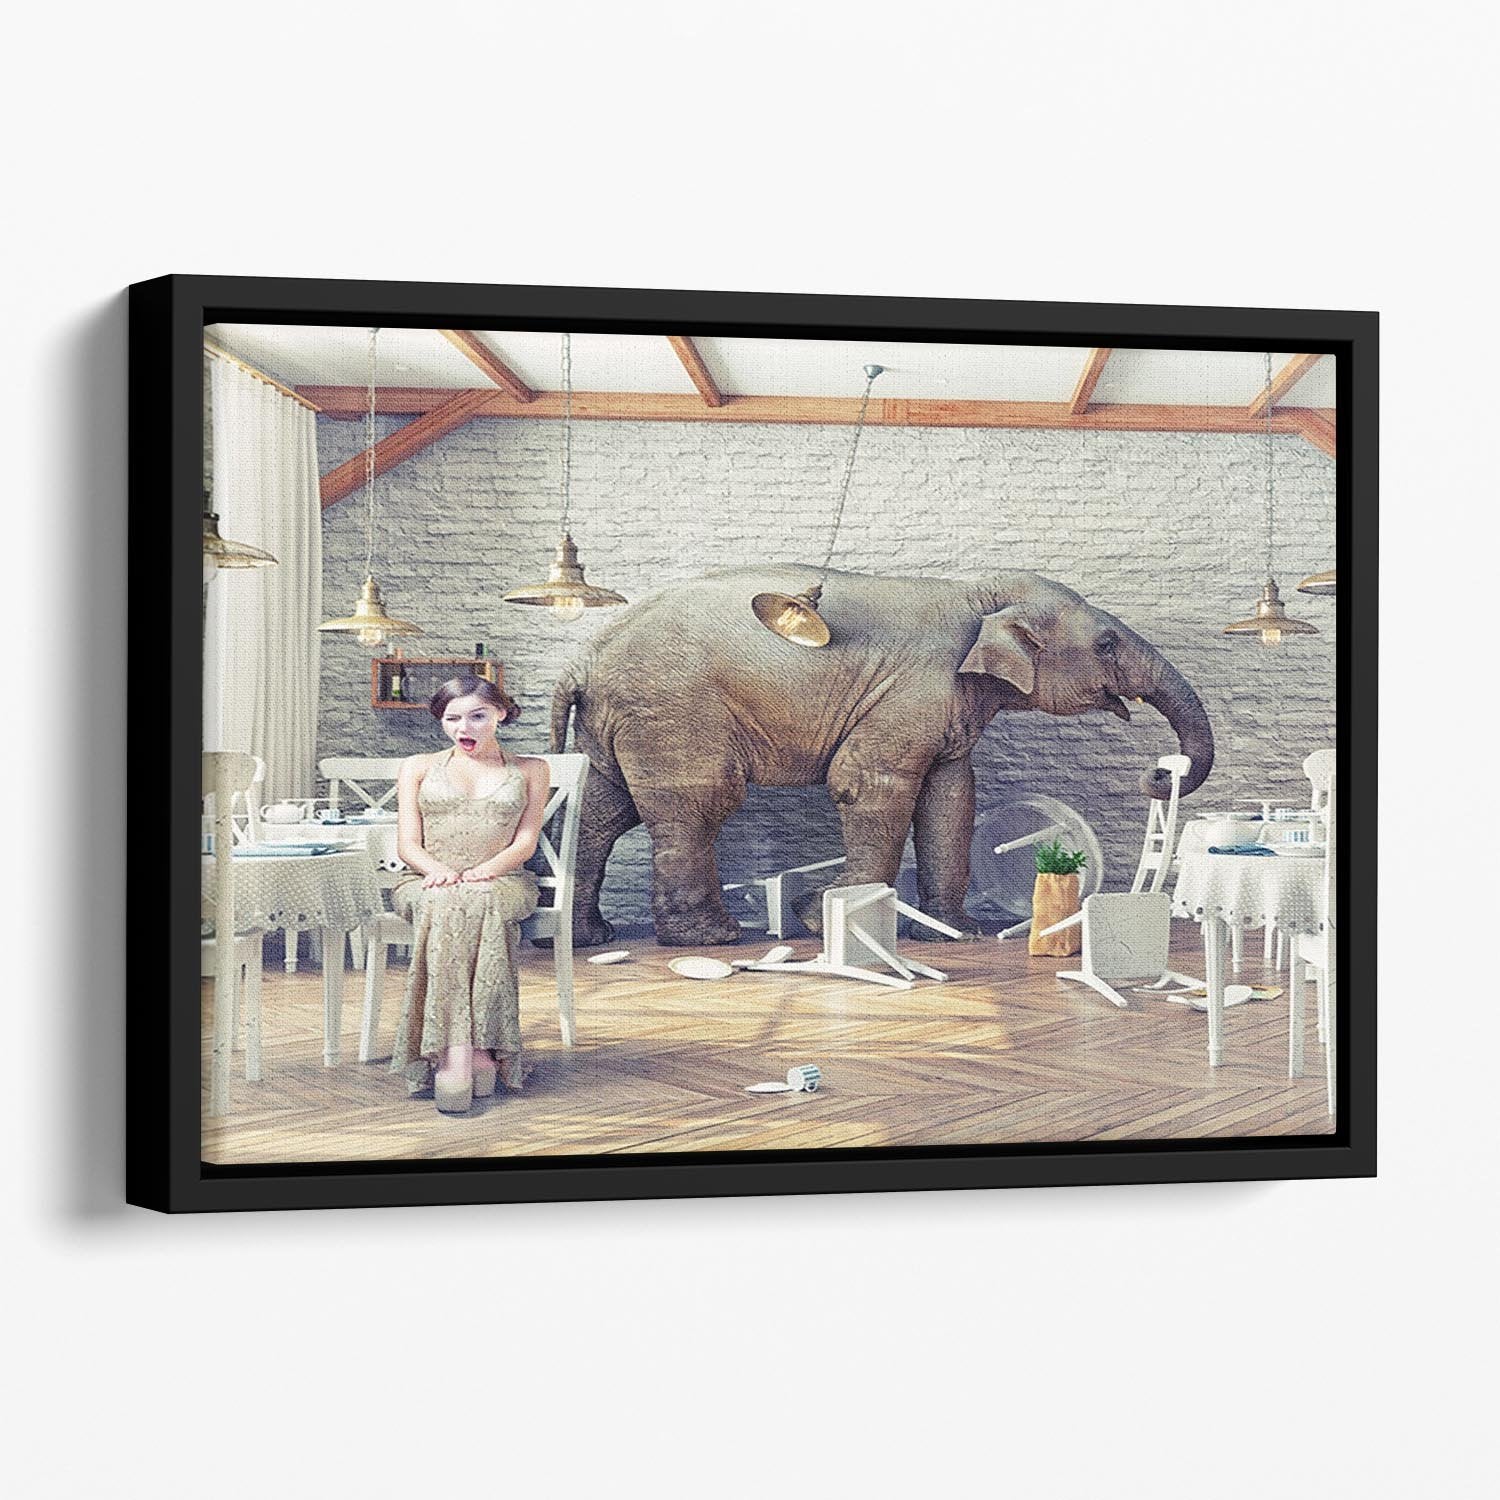 The elephant calm in a restaurant interior. photo combination concept Floating Framed Canvas - Canvas Art Rocks - 1